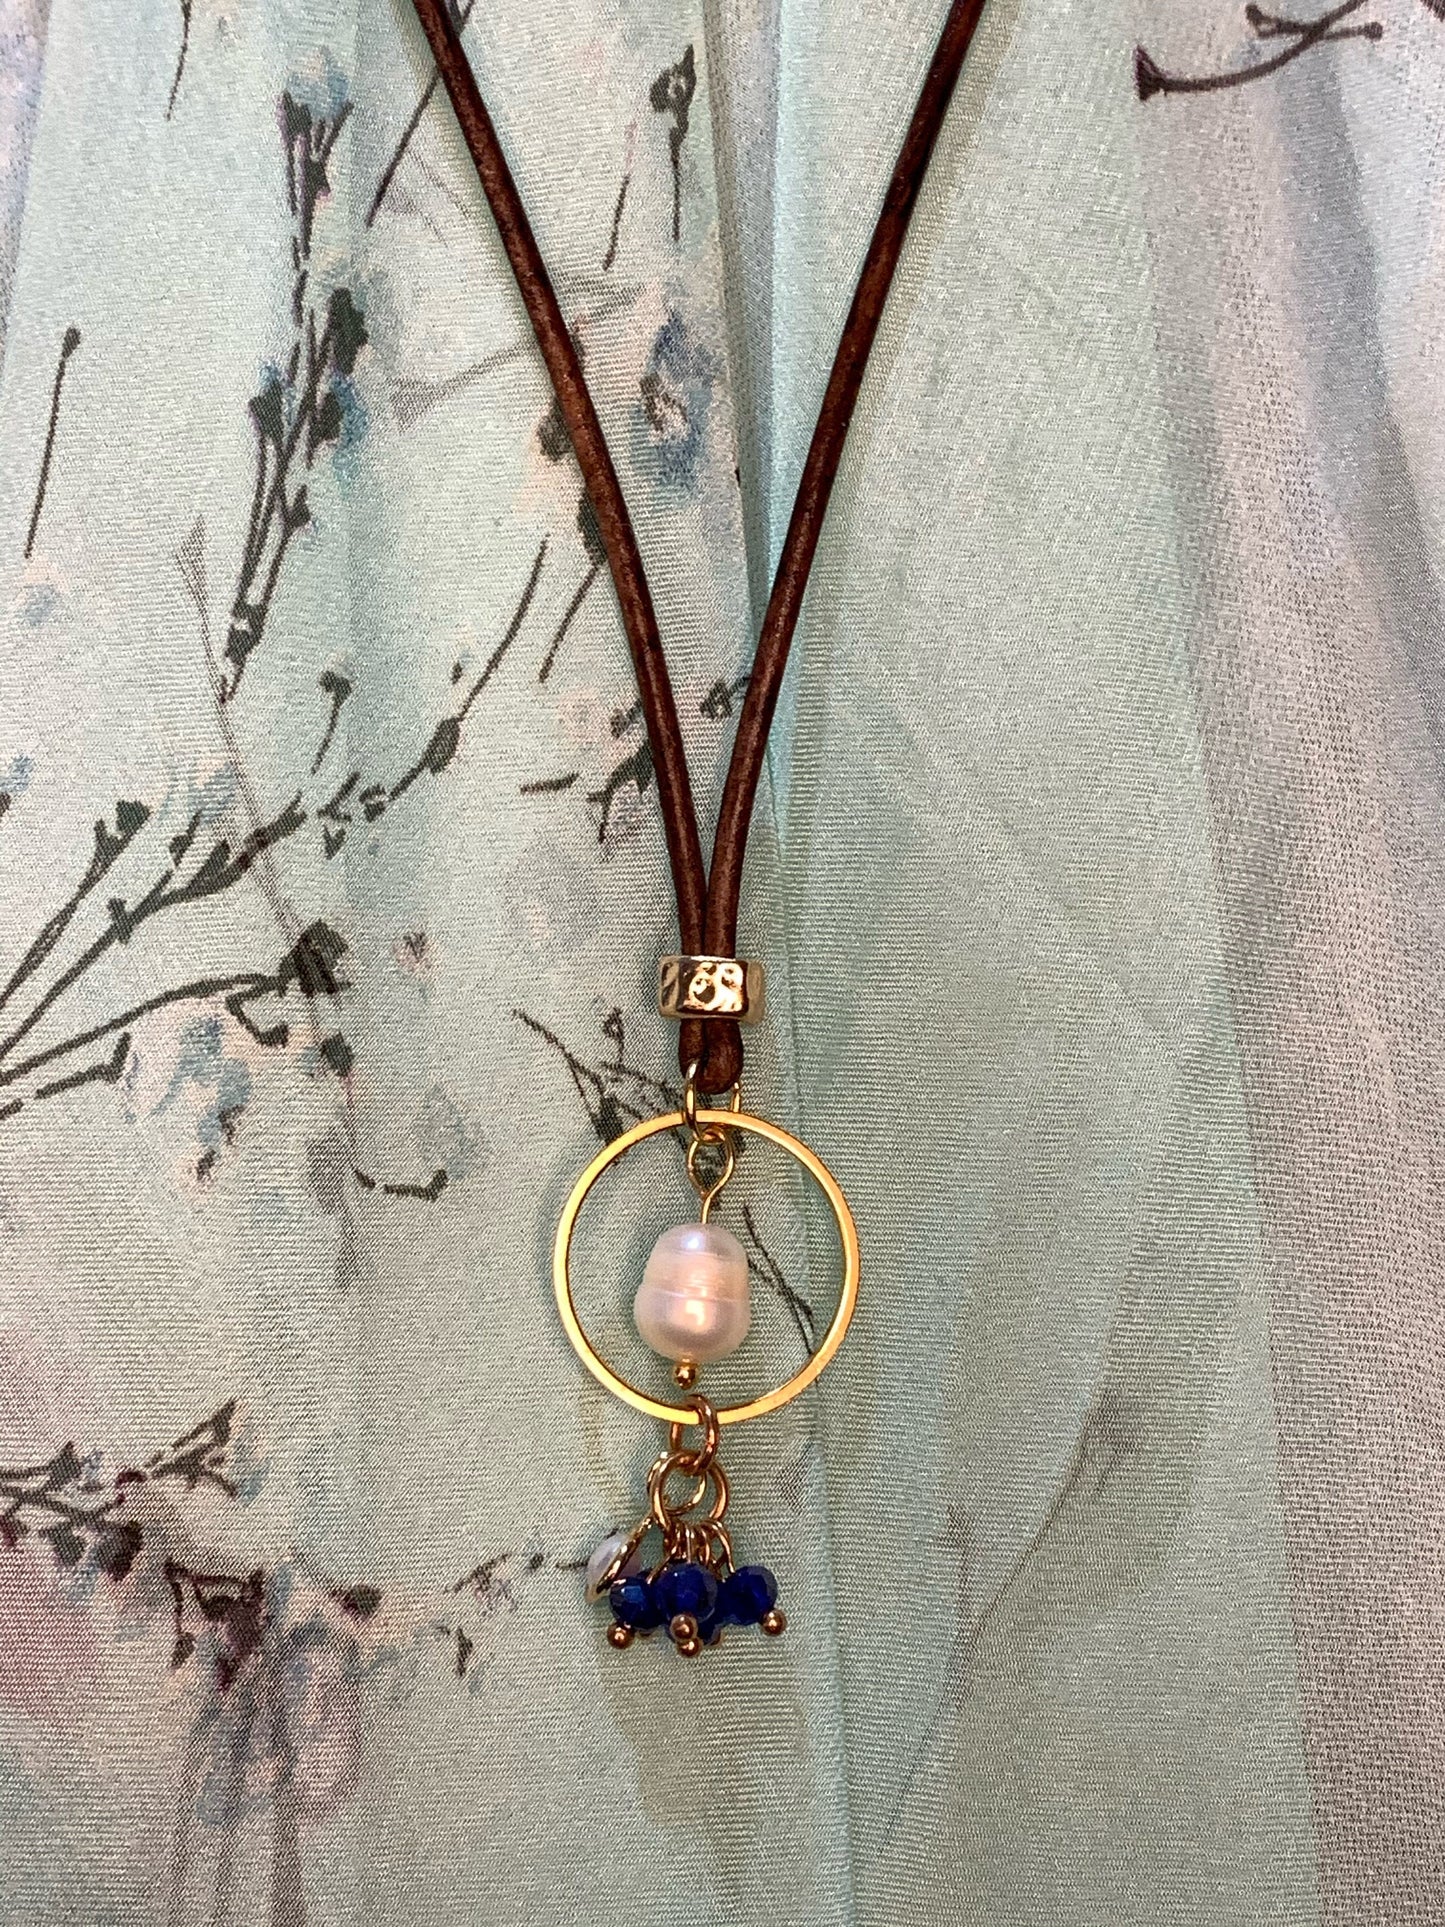 Leather and Pearl Necklace with fun blue gem charms, freshwater pearls and gold accents